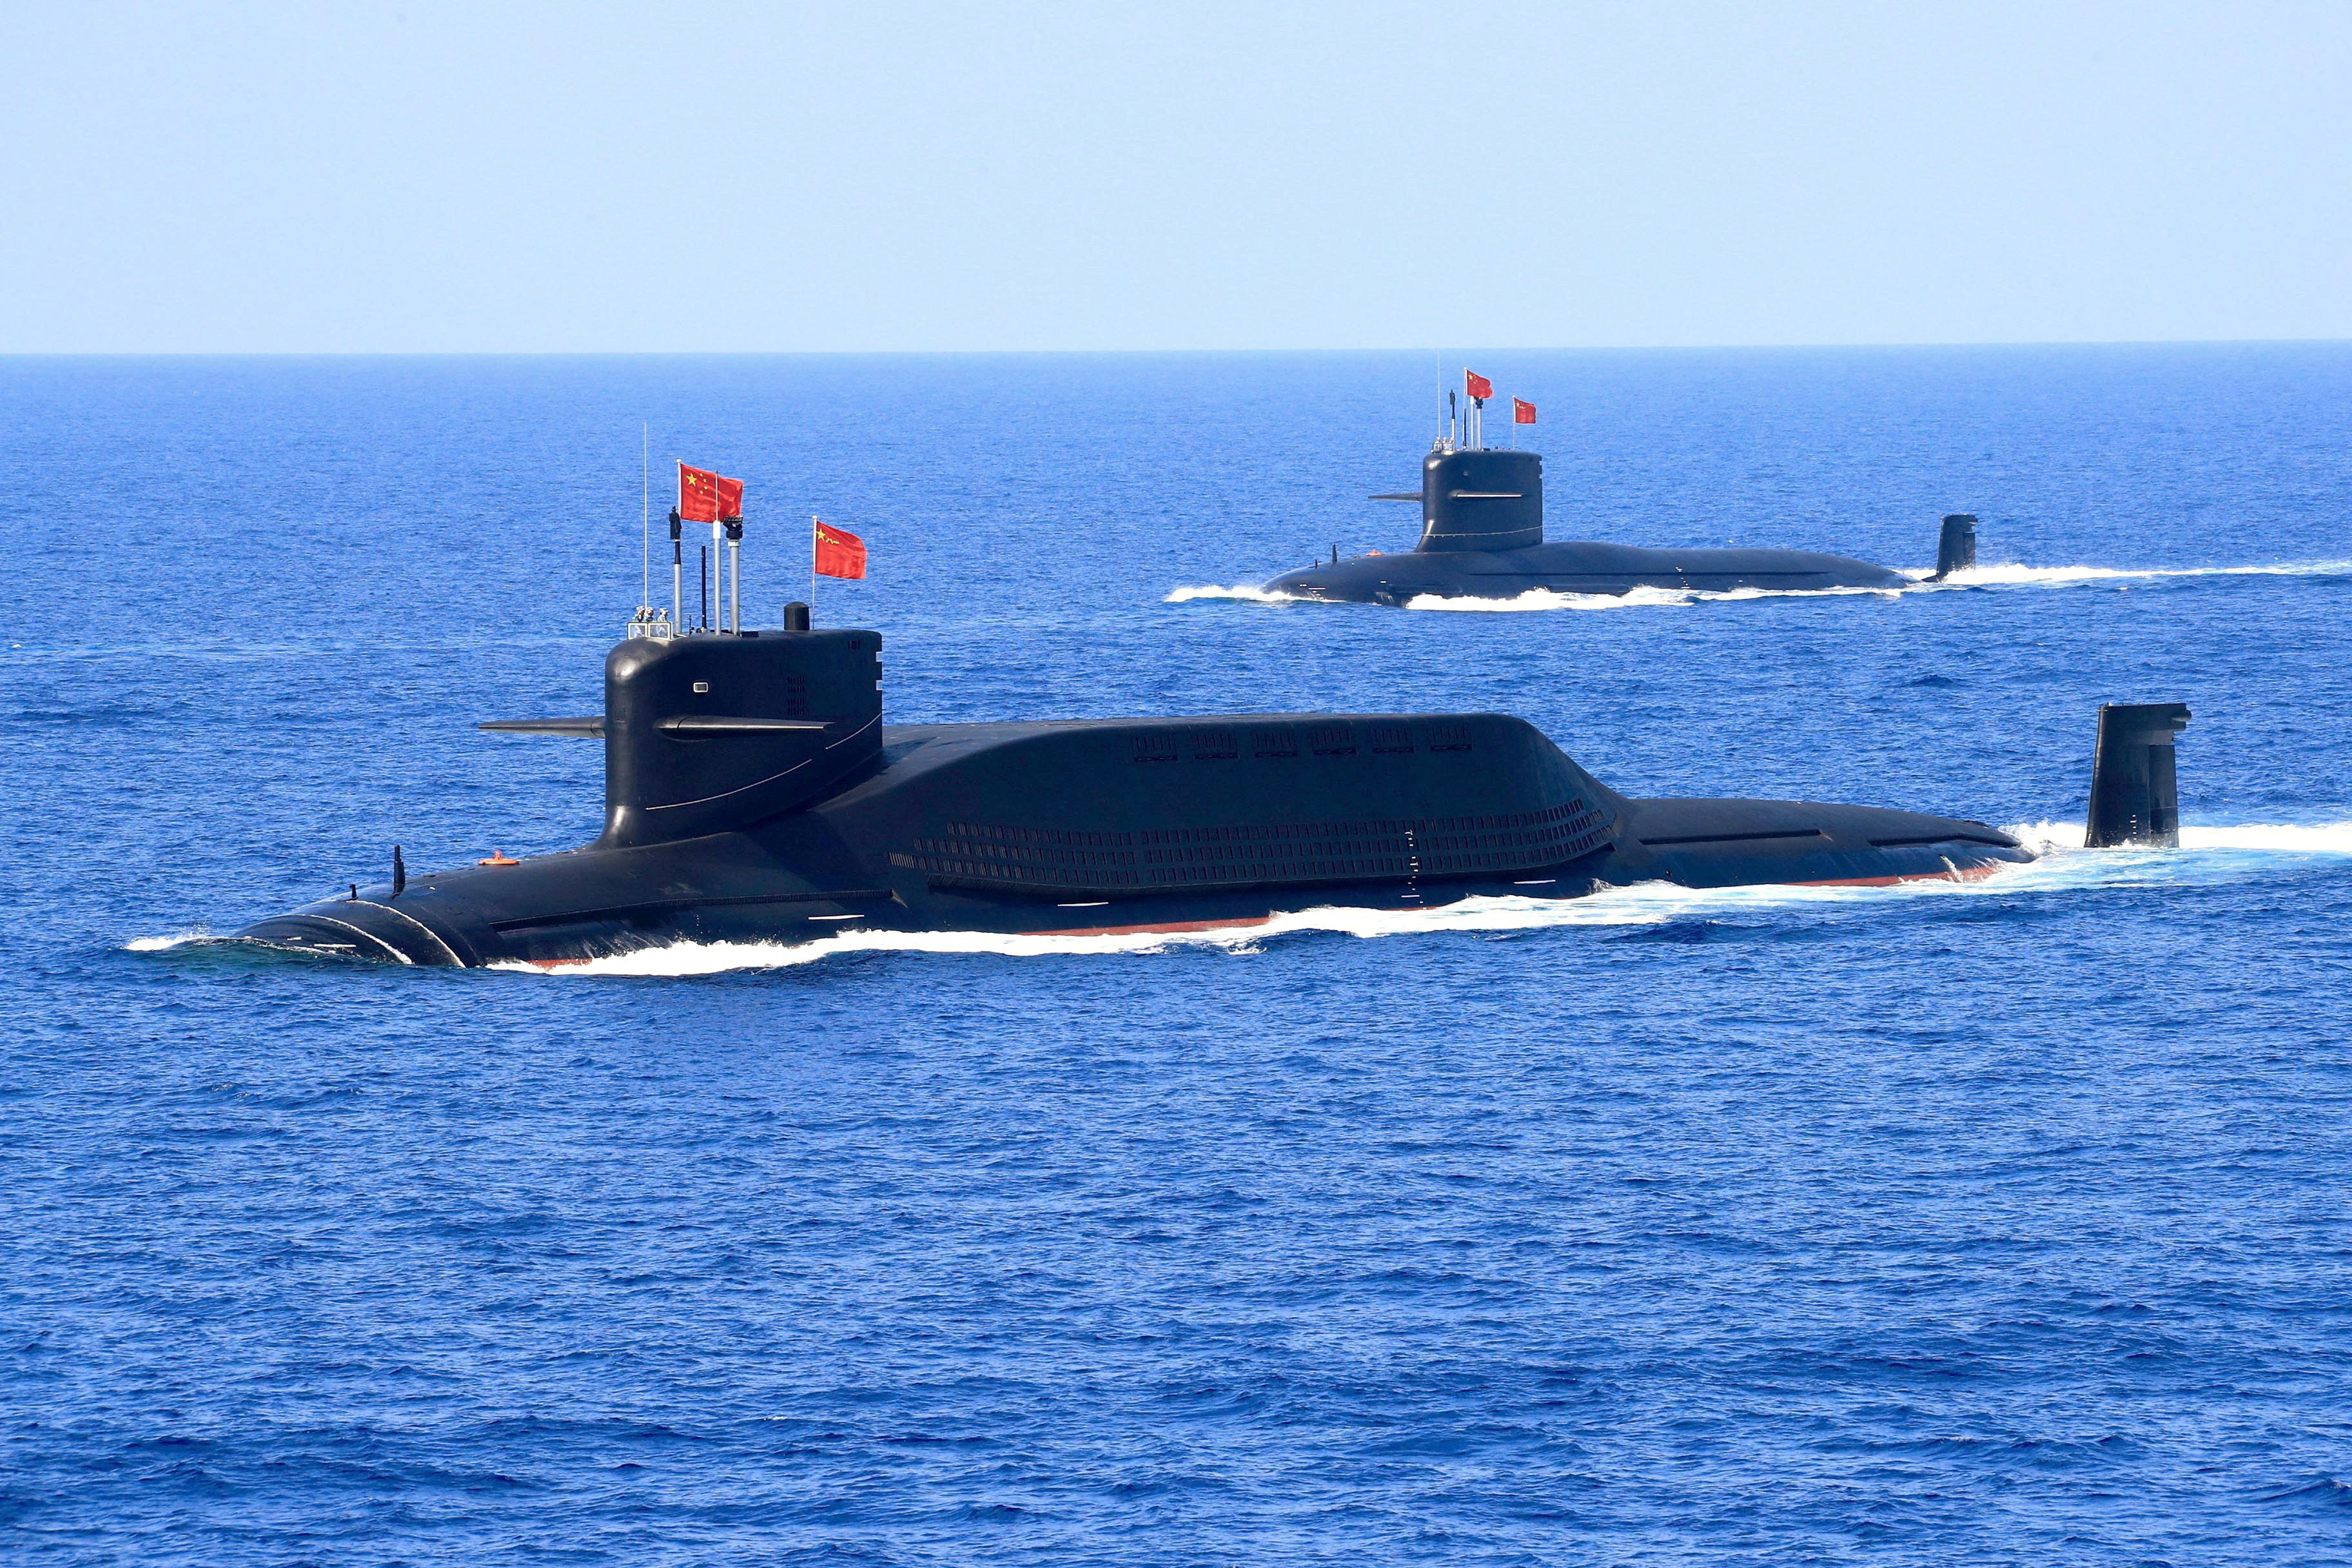 File: Nuclear-powered Type 094A Jin-class ballistic missile submarine of the Chinese People’s Liberation Army (PLA) Navy is seen during a military display in the South China Sea